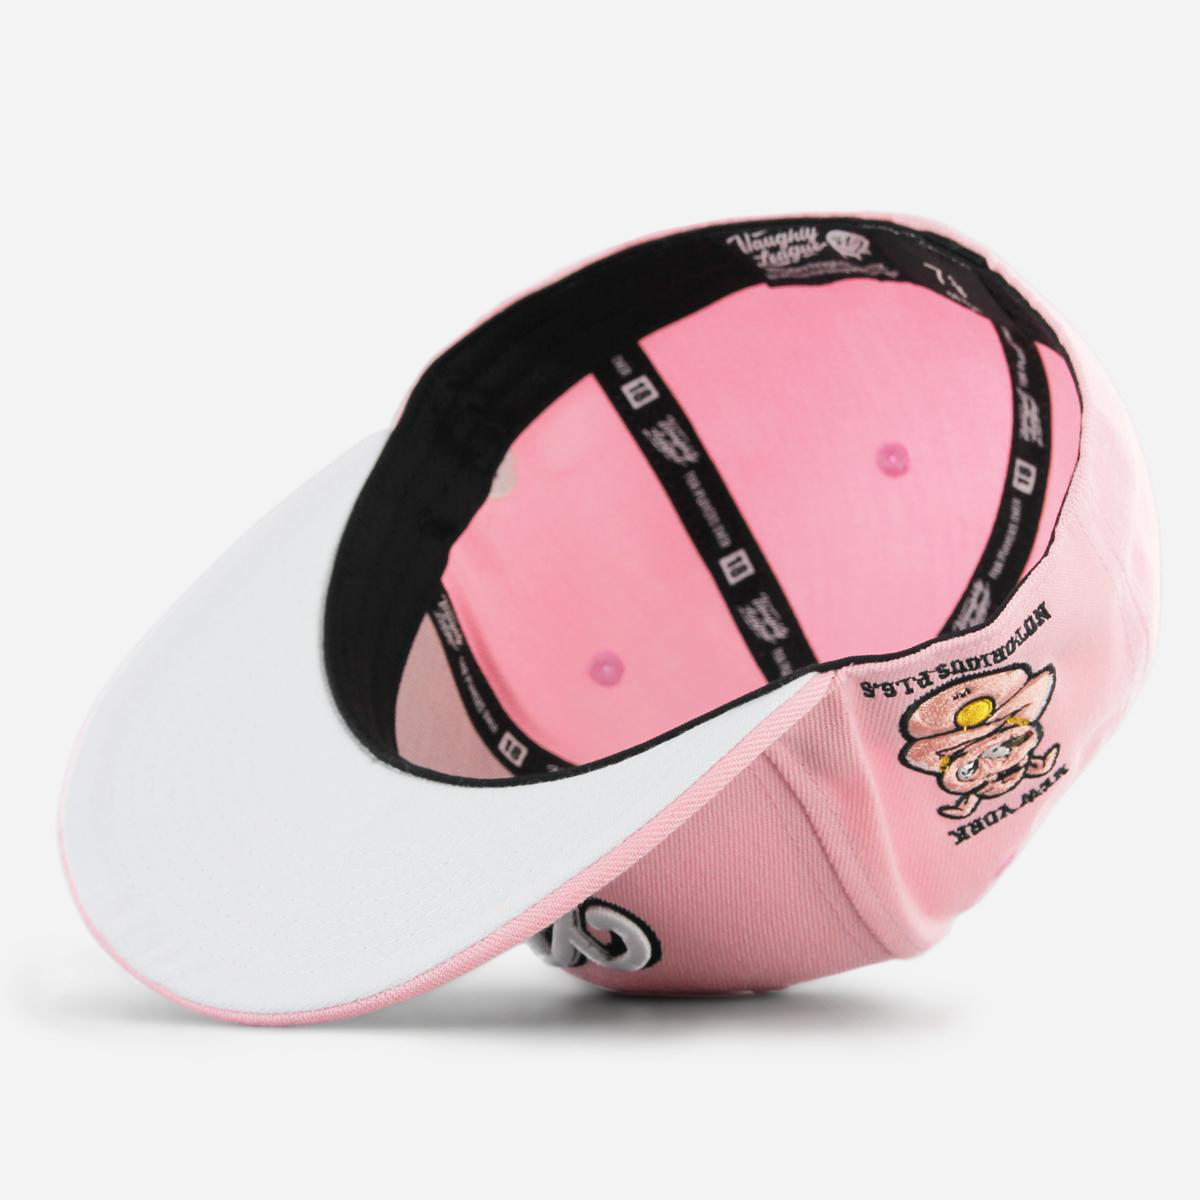 New York Notorious Pigs Fitted Baby Pink